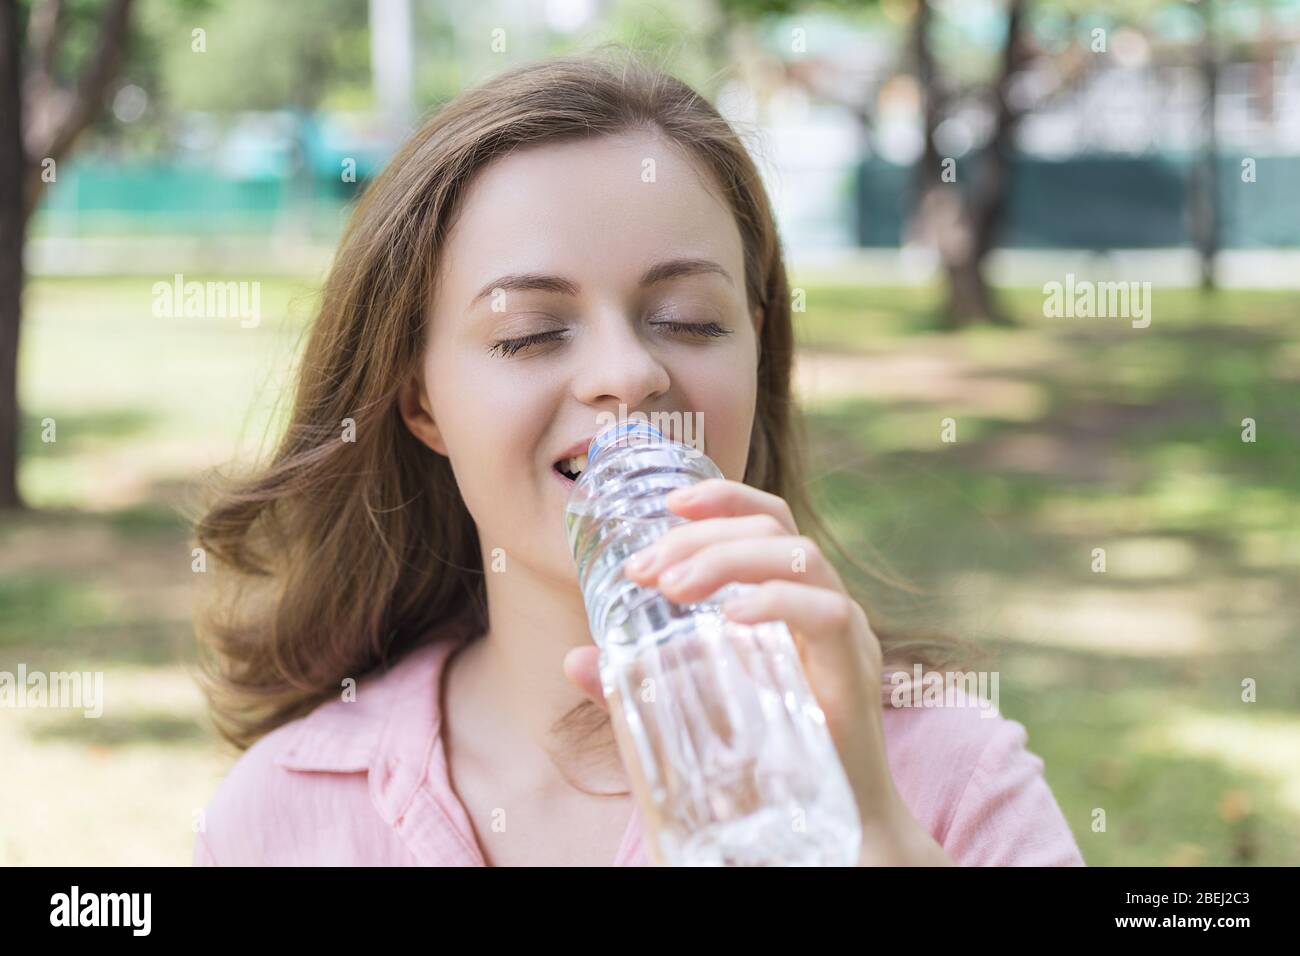 Young caucasian woman girl drinking water from a plastic bottle in green park, close up Stock Photo